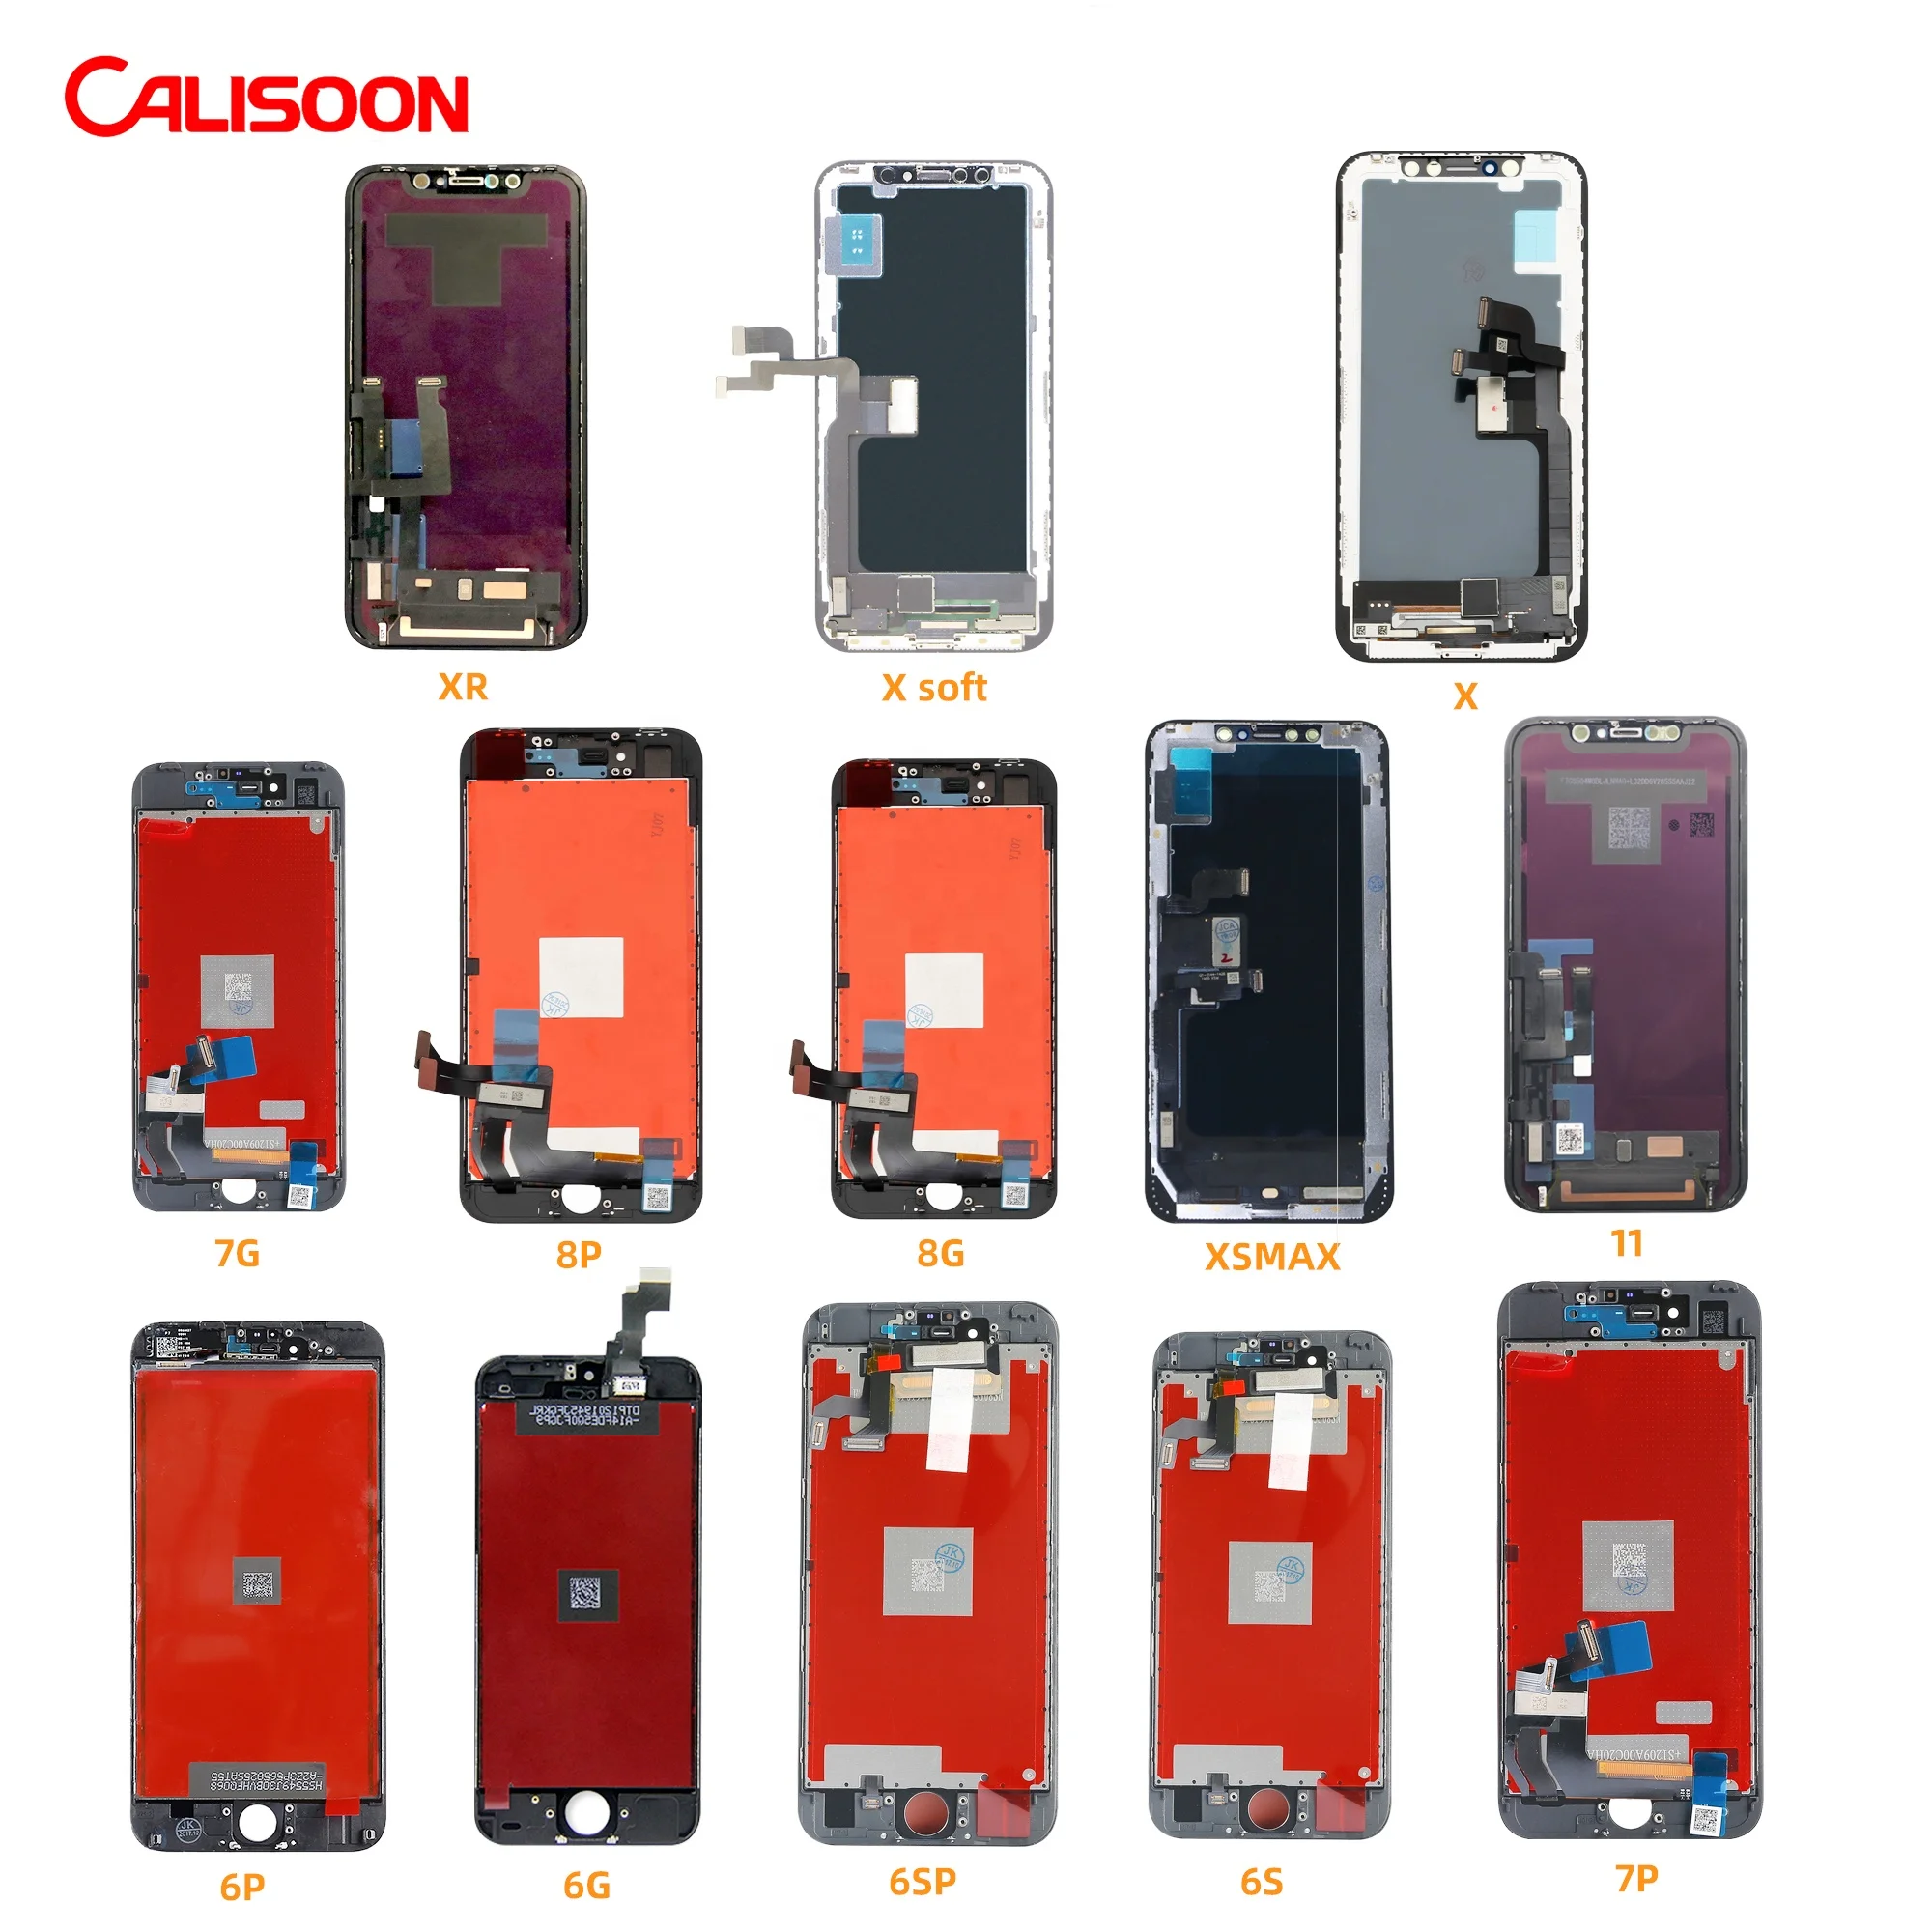 

2021 BRAND NEW CALISOON Factory Direct Price Mobile Phone LCD display For IPhone 6 6S 7 7P 8 Plus X XR XS 11 Pro MAX, Black,white